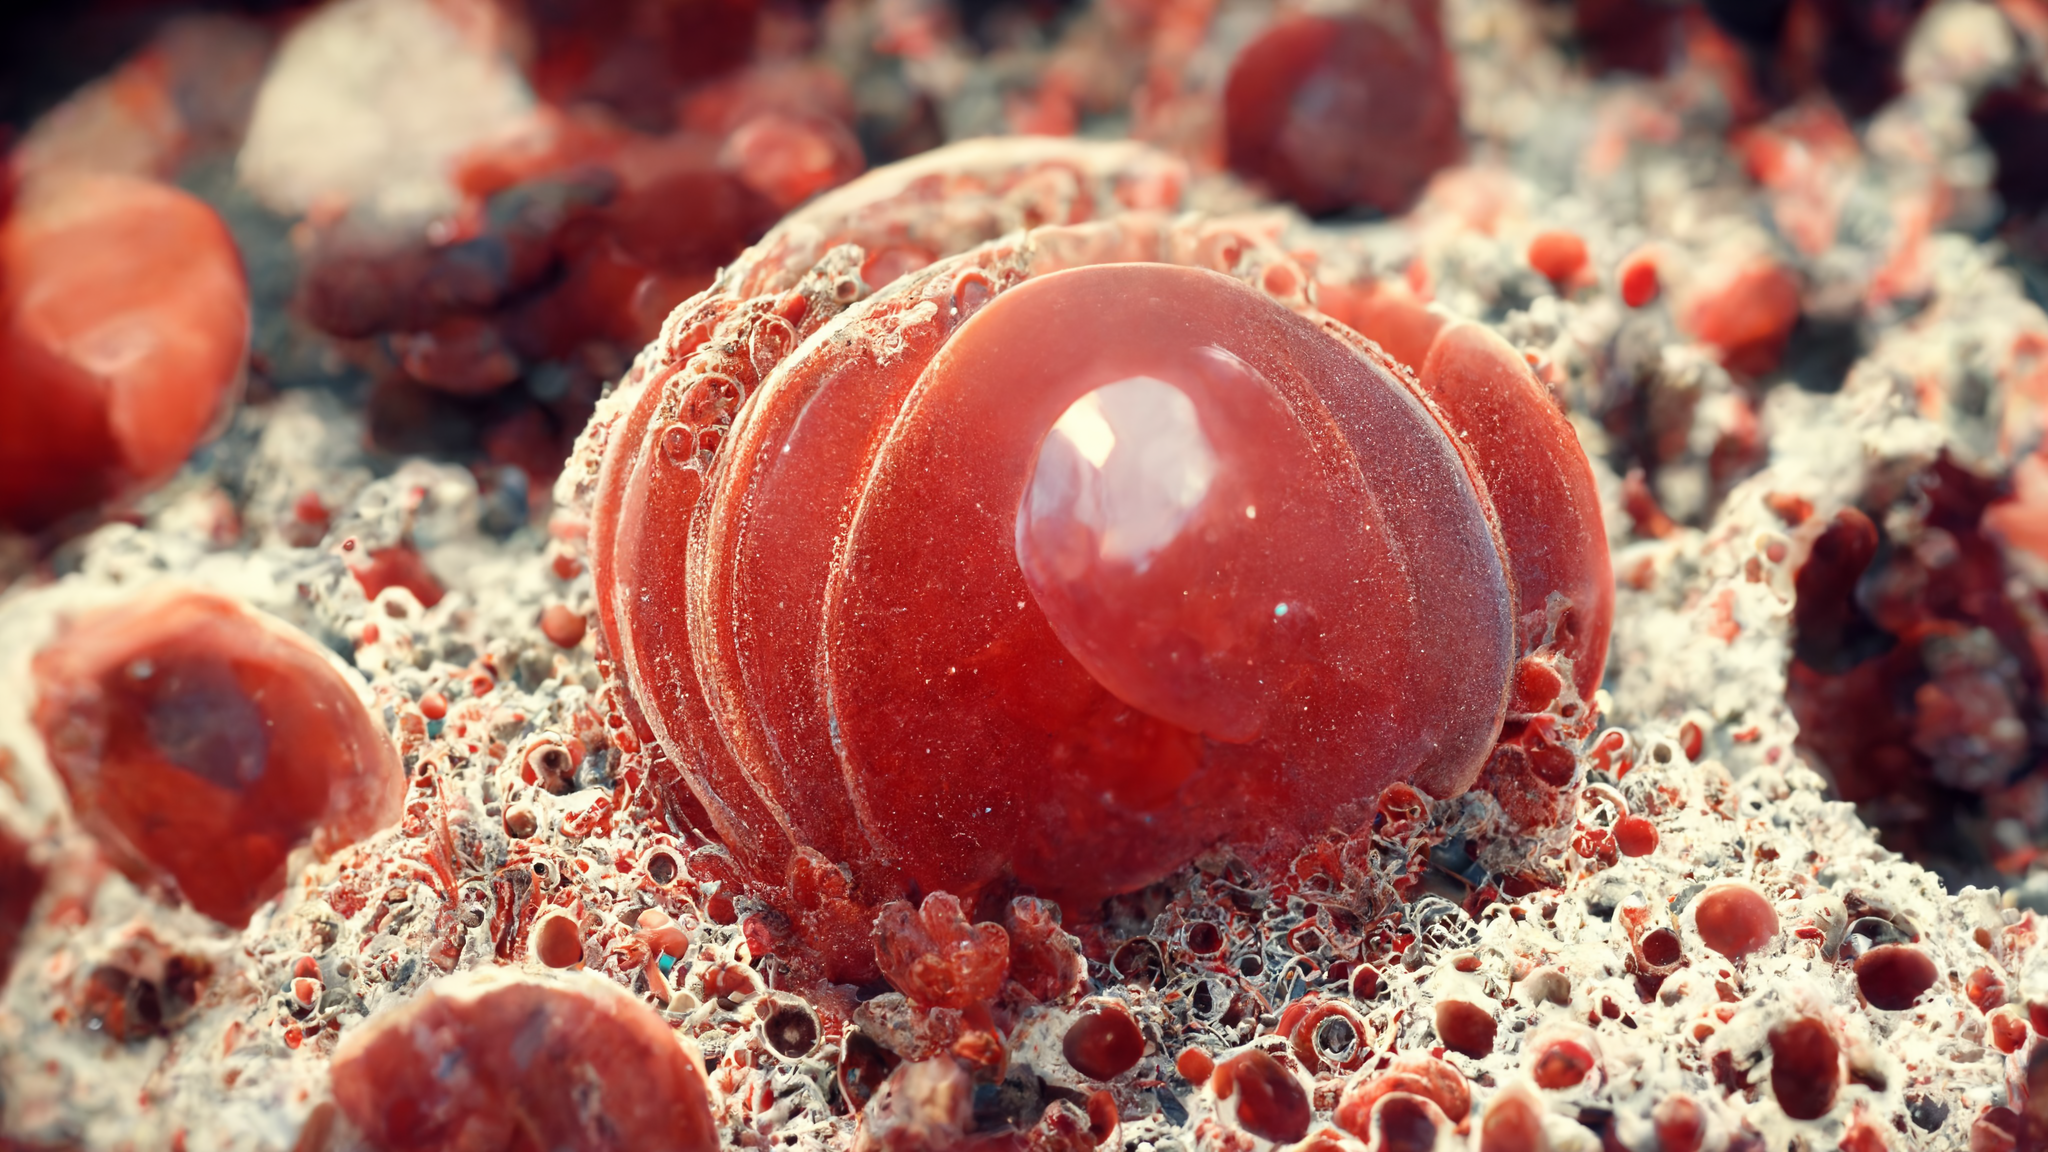 Christopher_A_erythrocyte_high_detail_8K_rendered_in_octane_08422f36-c071-455f-b9aa-65048336cc6d.png